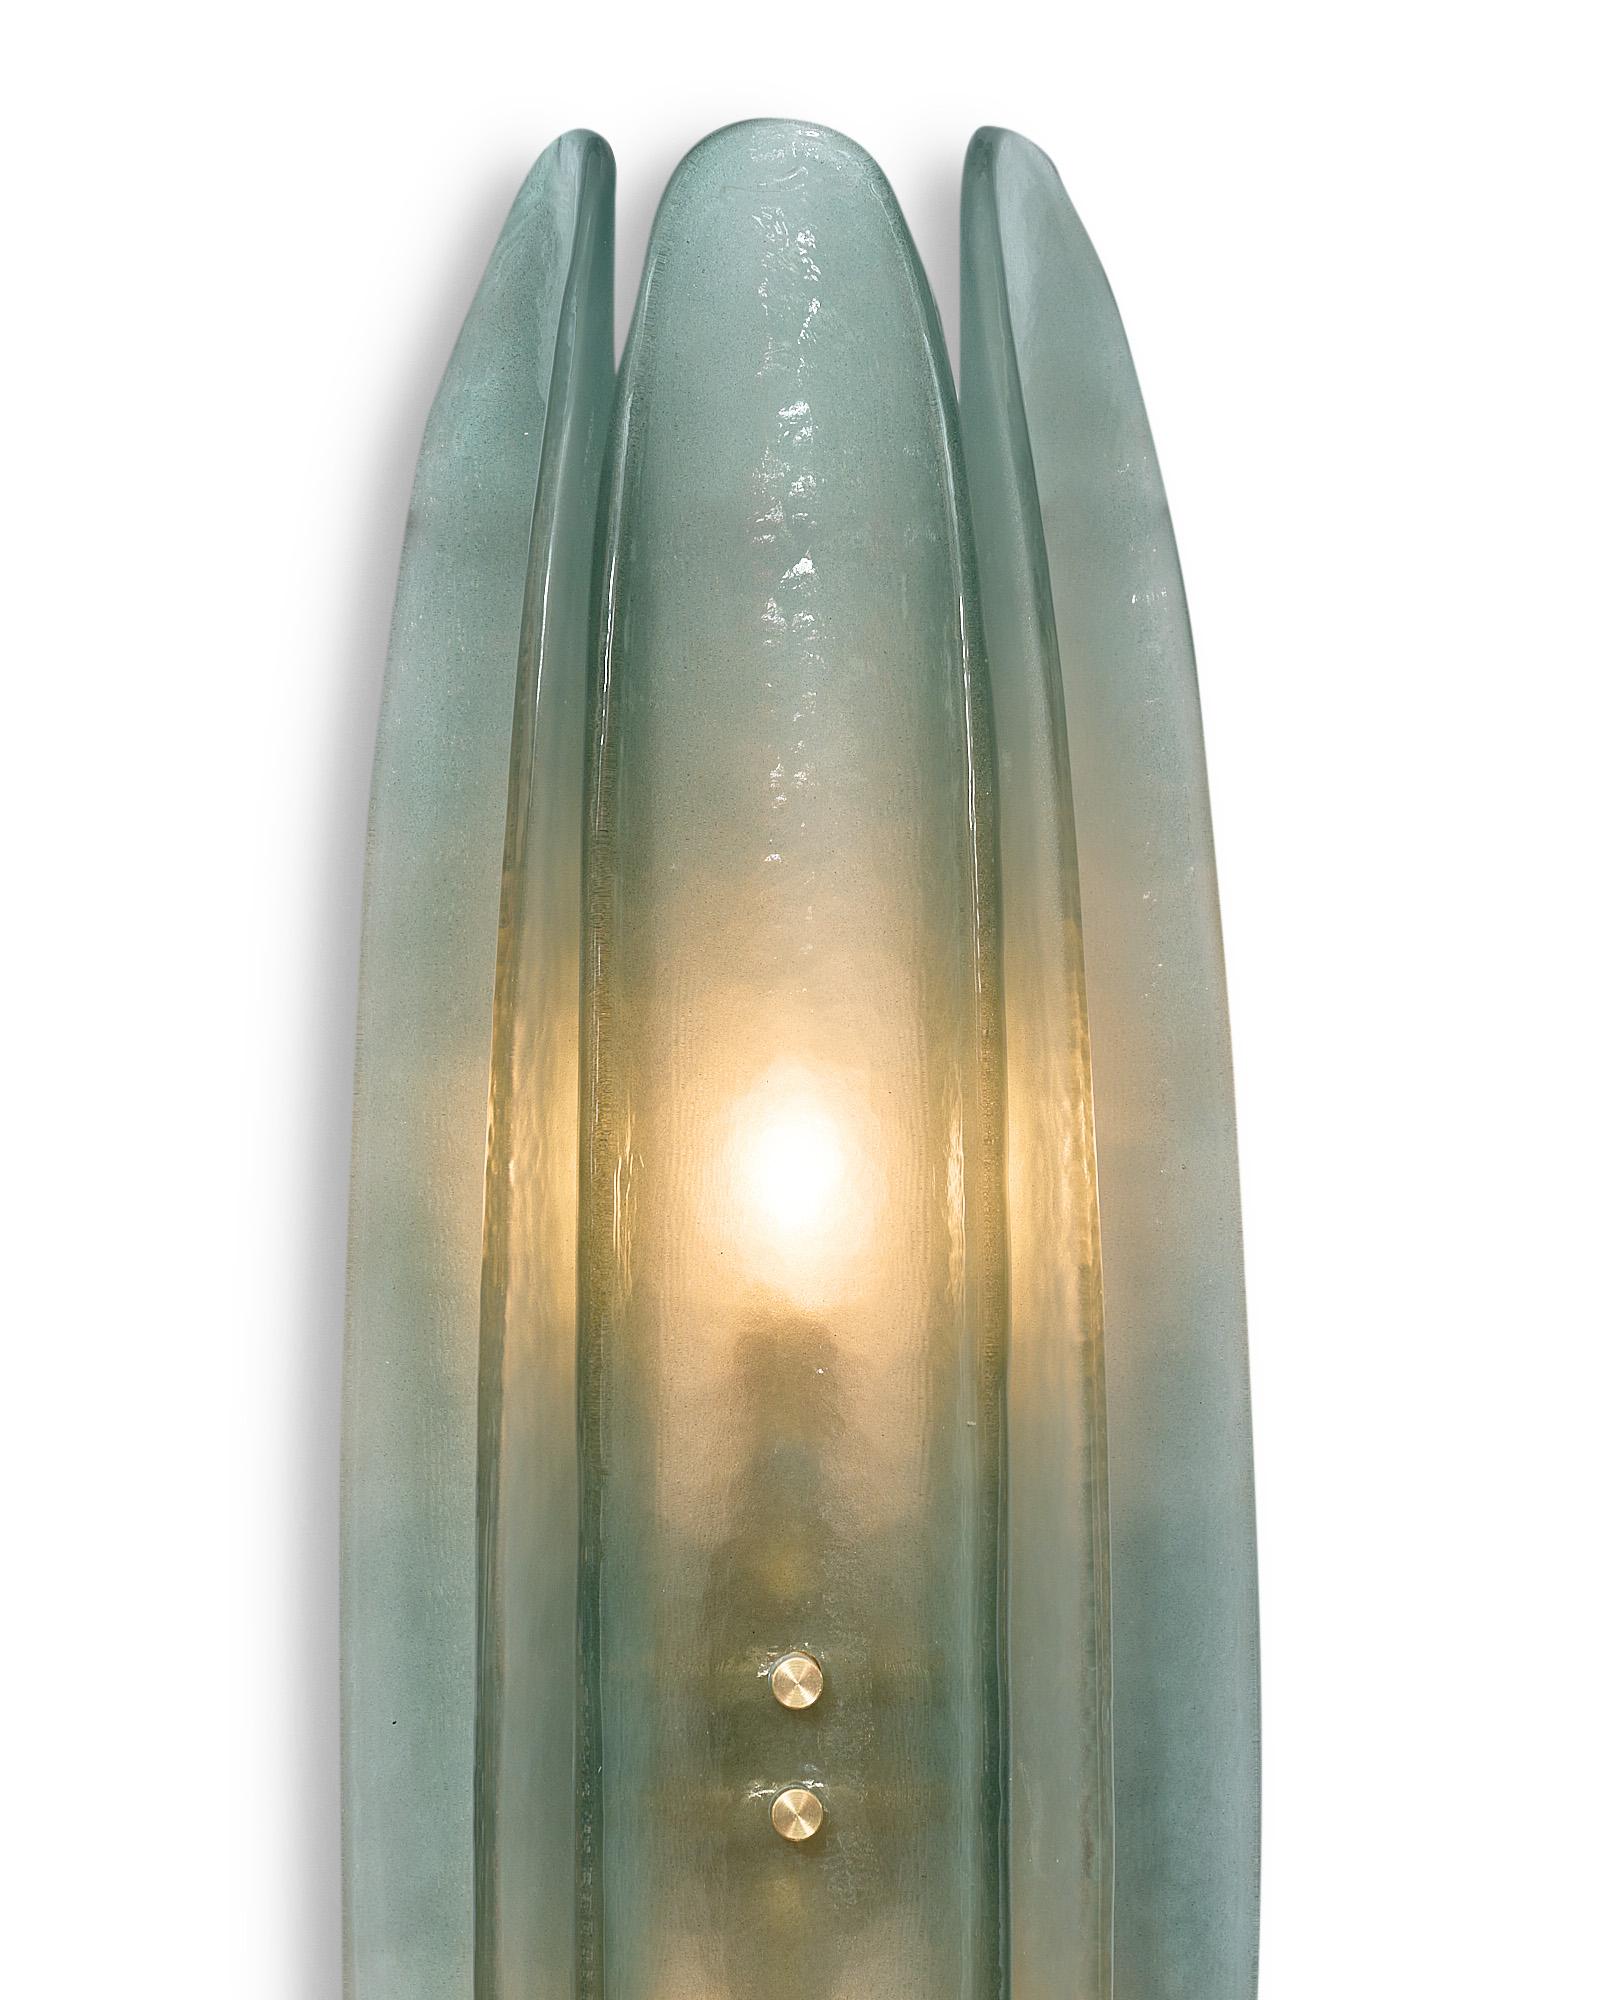 Pair of Murano glass paneled sconces, each crafted with three curved panels of hand-blown aqua glass on a brass frame. We love the modern style and hand-crafted quality of these sconces. They have been newly wired to fit US standards.
